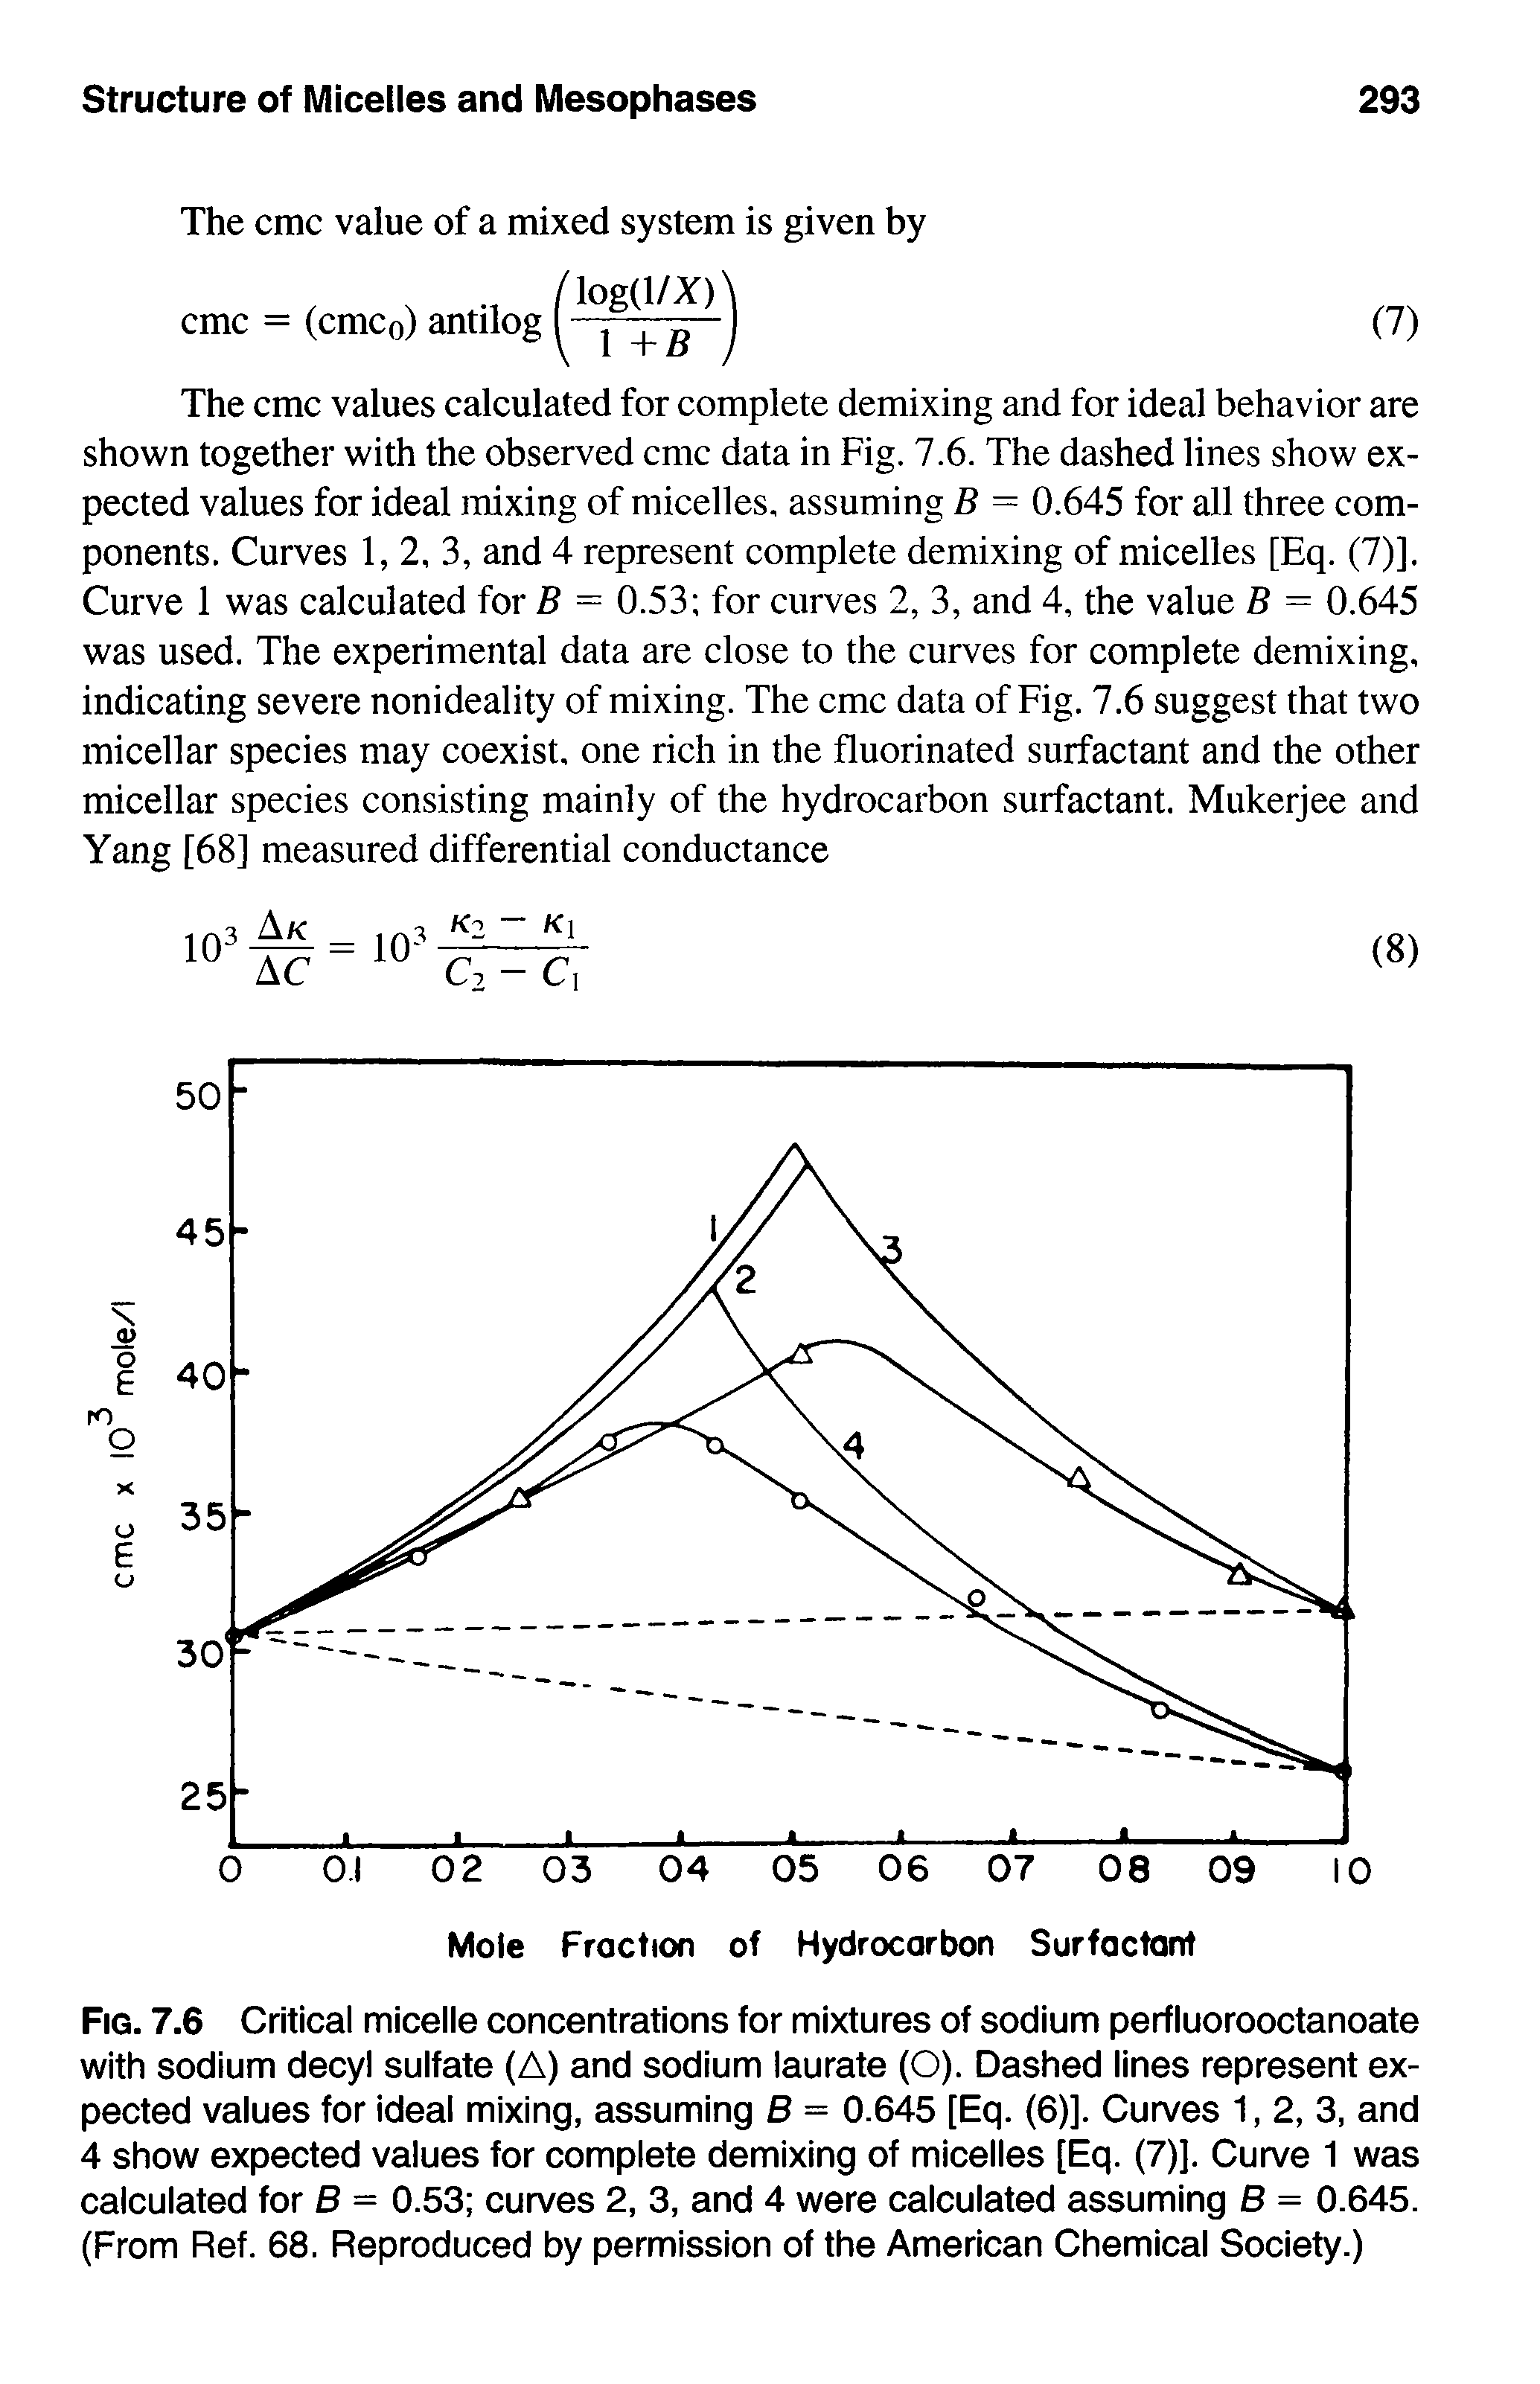 Fig. 7.6 Critical micelle concentrations for mixtures of sodium perfluorooctanoate with sodium decyl sulfate (A) and sodium laurate (O). Dashed lines represent expected values for Ideal mixing, assuming B = 0.645 [Eq. (6)]. Curves 1, 2, 3, and 4 show expected values for complete demixing of micelles [Eq. (7)]. Curve 1 was calculated for B = 0.53 curves 2, 3, and 4 were calculated assuming B = 0.645. (From Ref. 68. Reproduced by permission of the American Chemical Society.)...